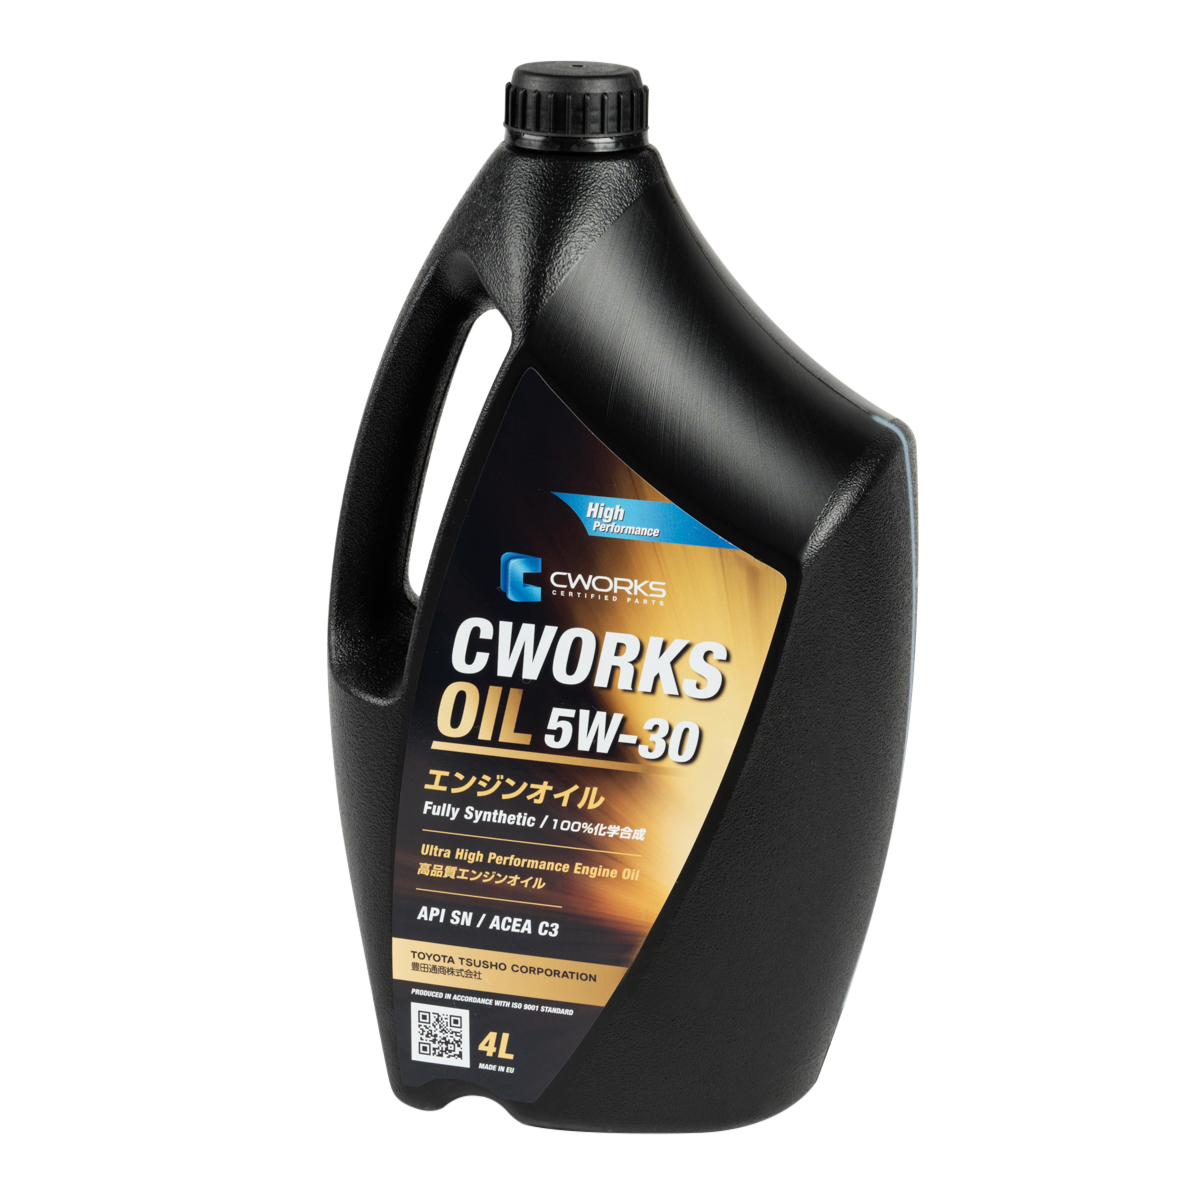 CWORKS OIL 5W-30 C3, 4L Масло моторное A130R2004